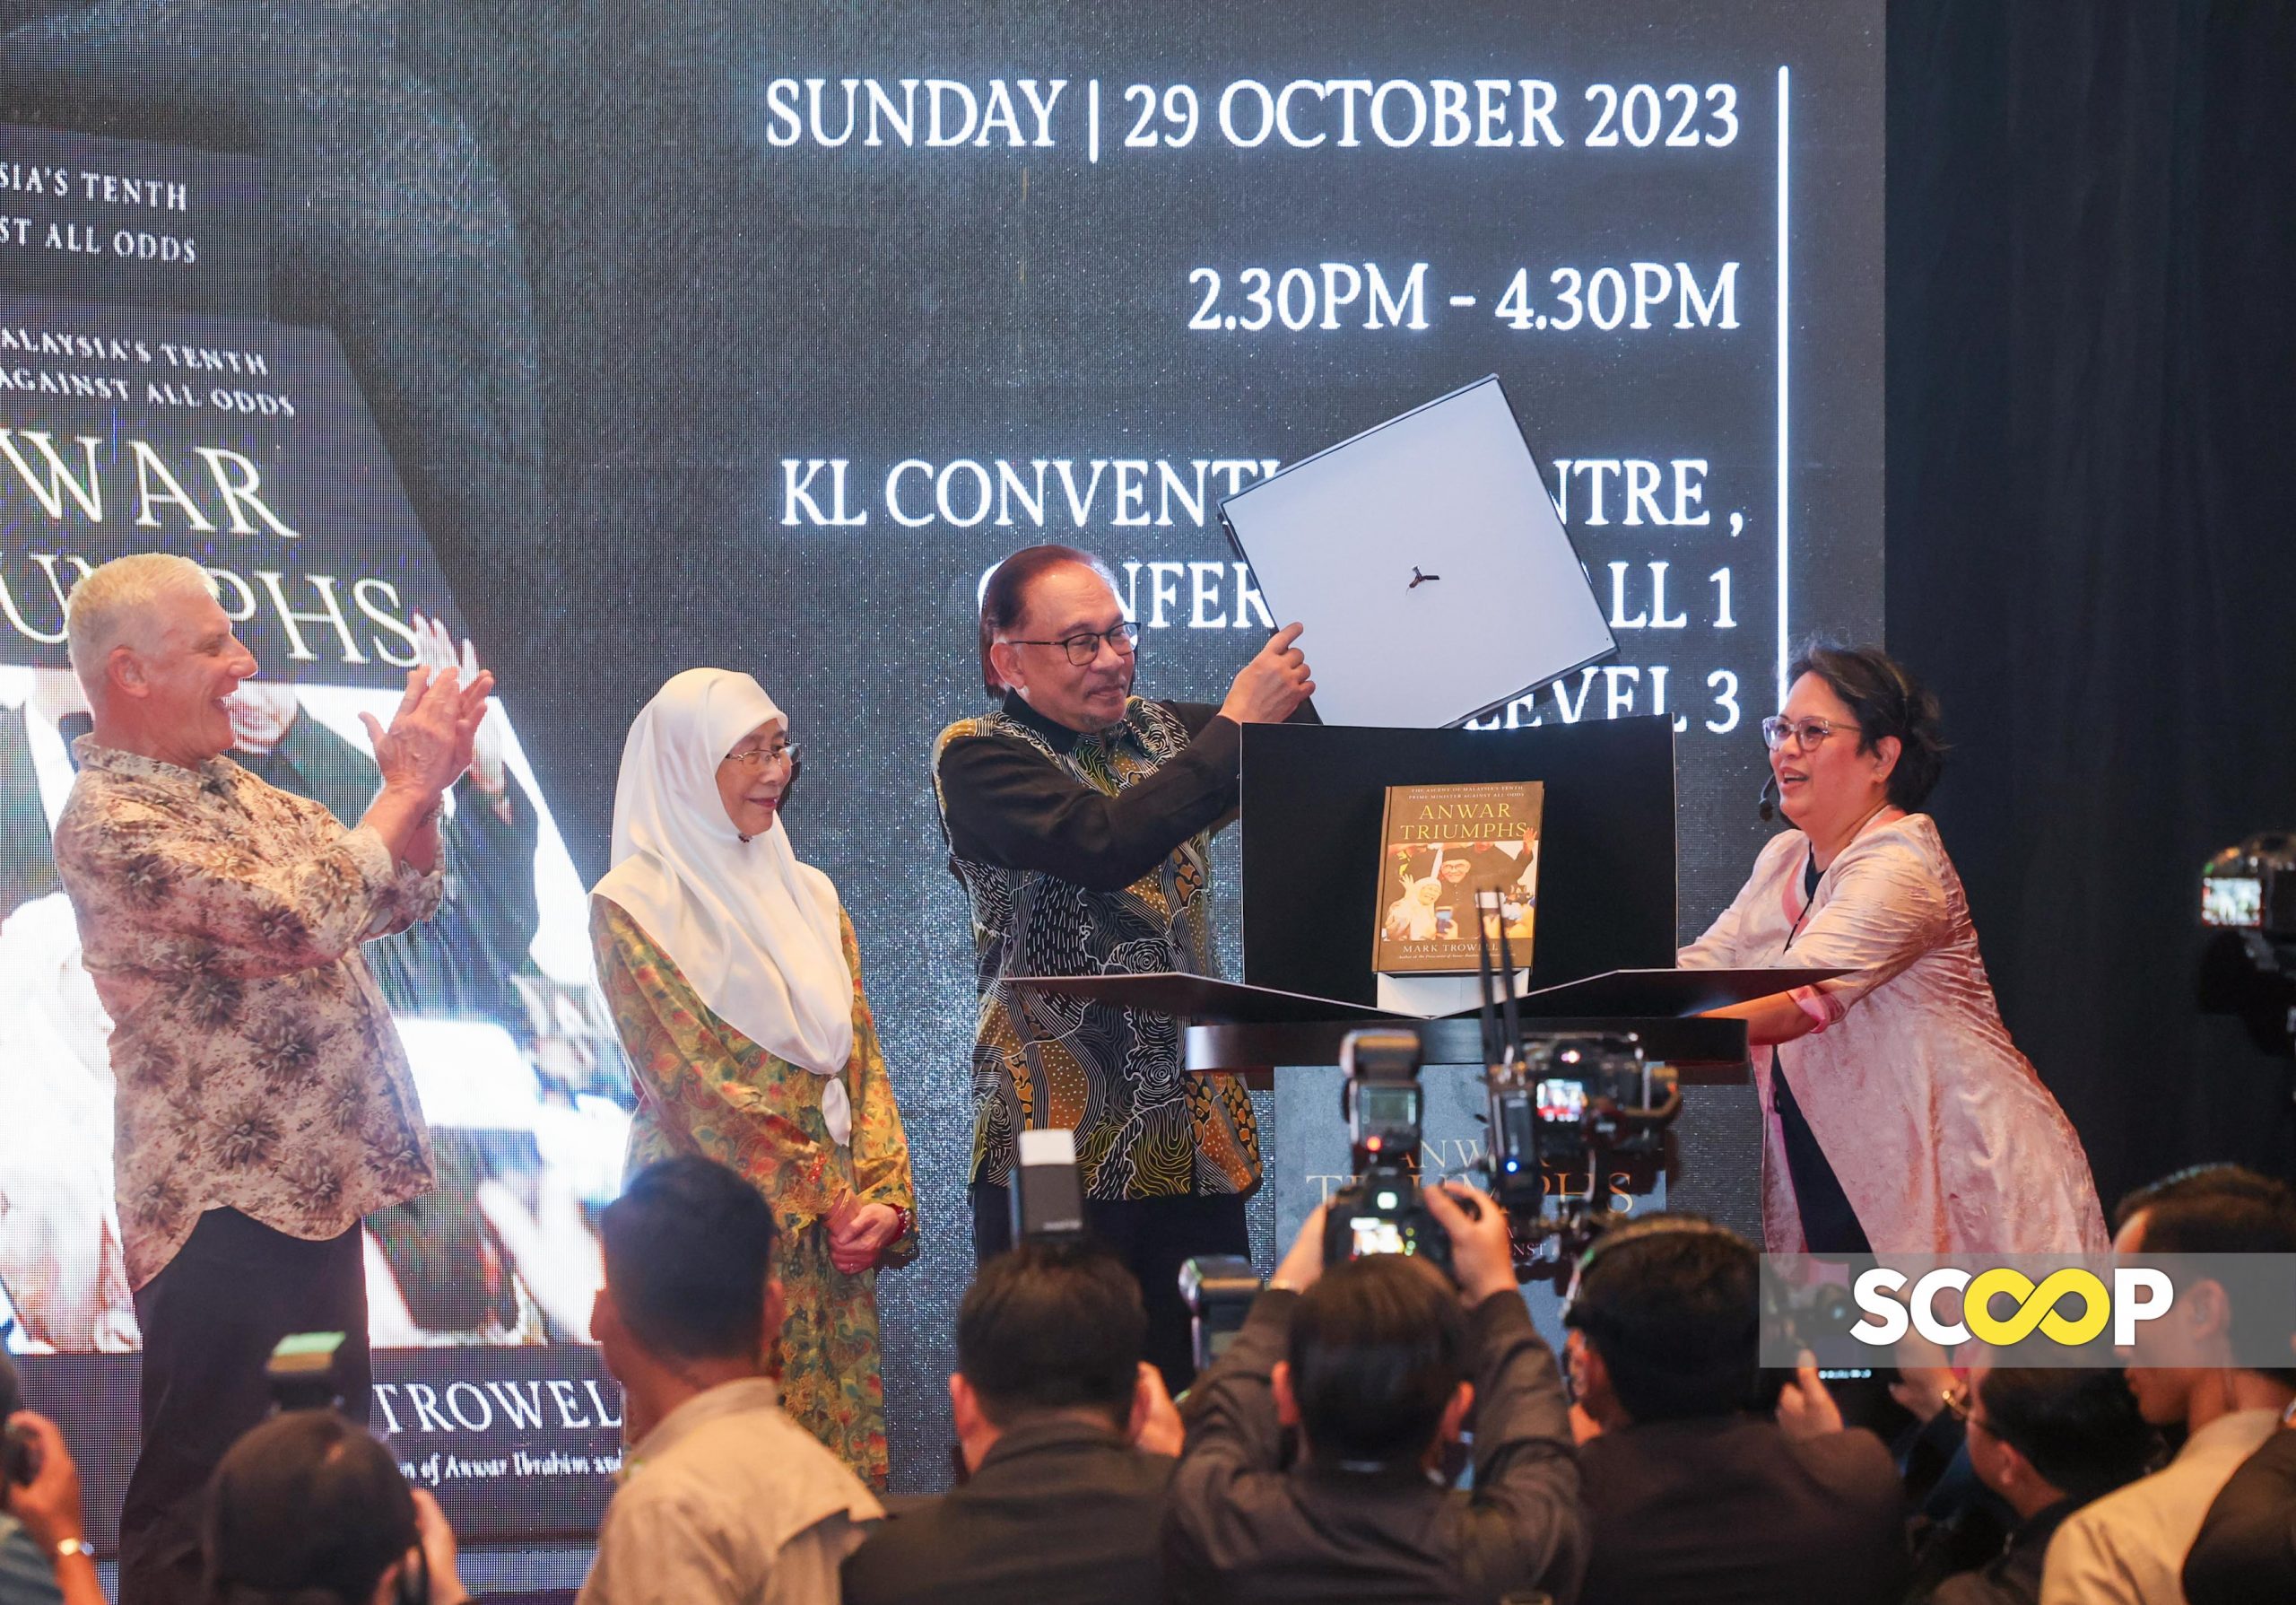 PM launches Anwar Triumphs, a recollection of his political journey